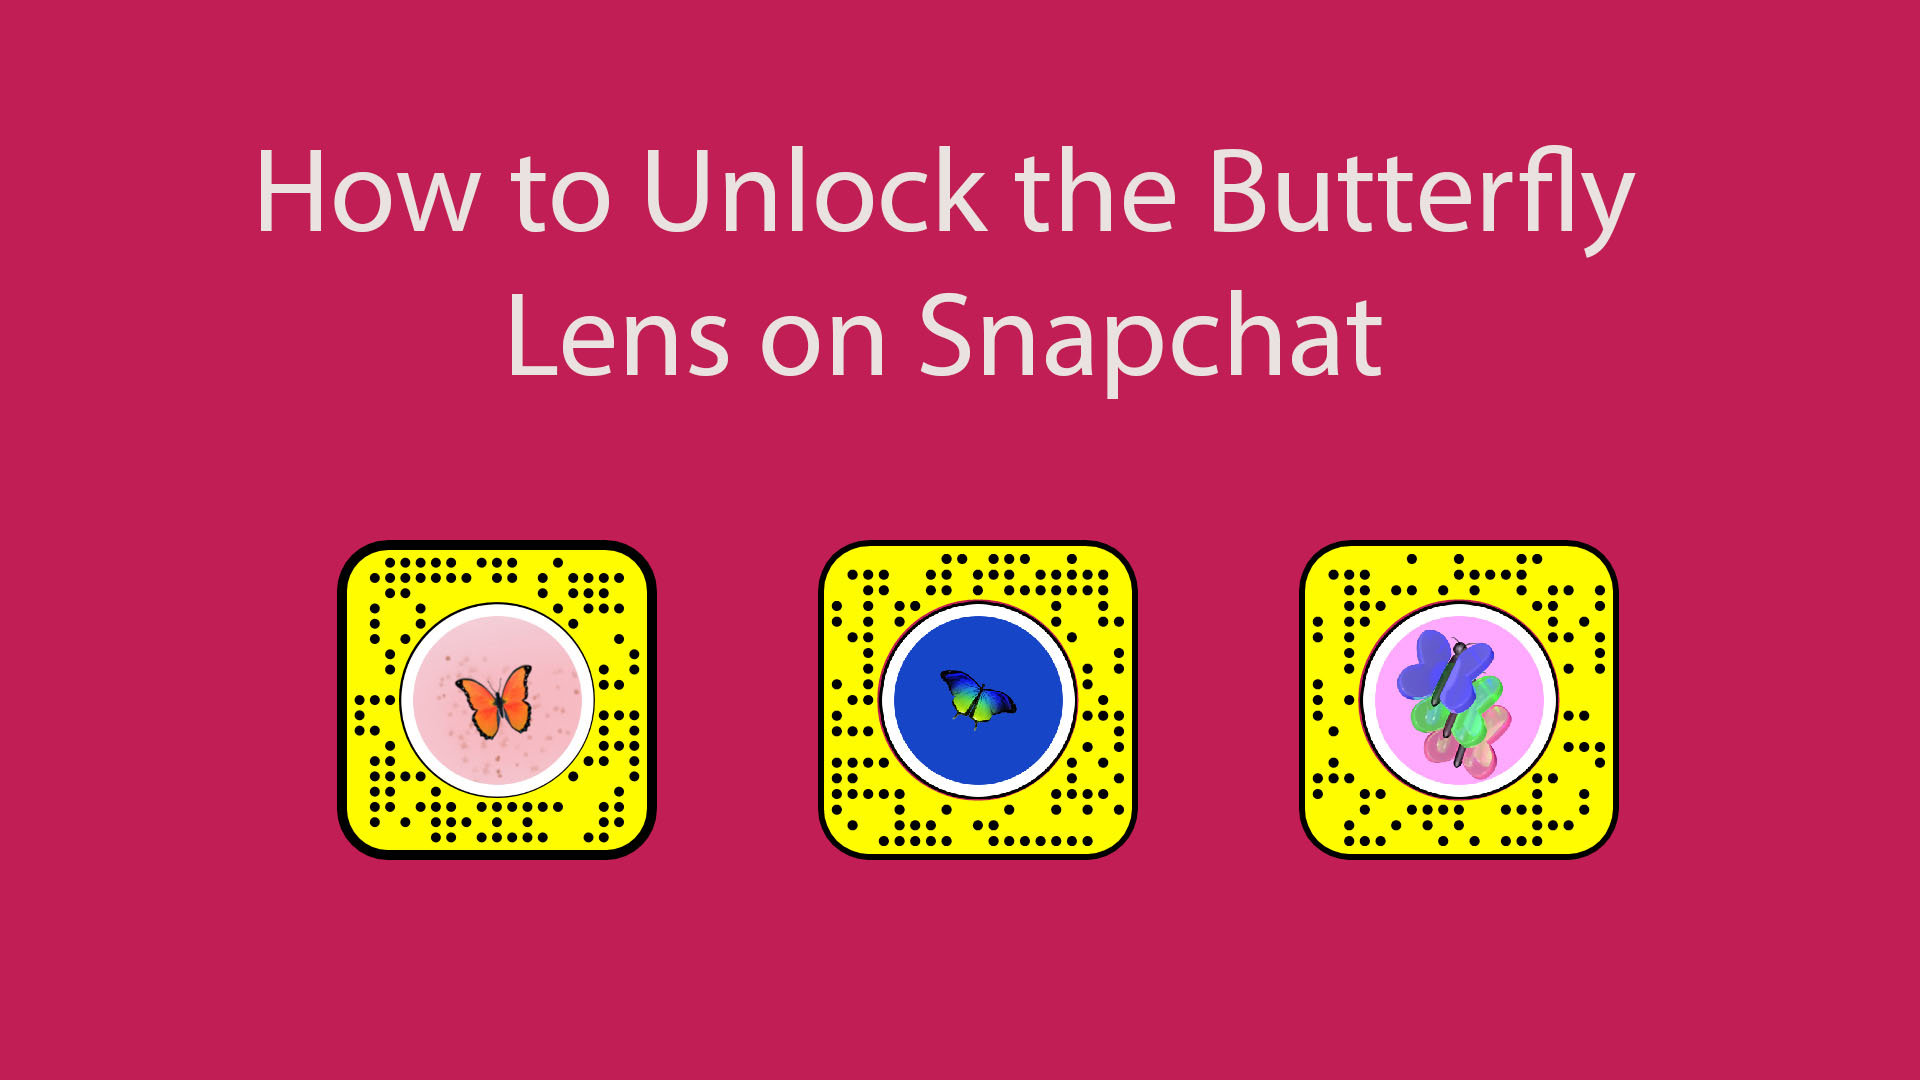 How to Unlock the Butterflies Lens on Snapchat on [iPhone/Android] in 2023